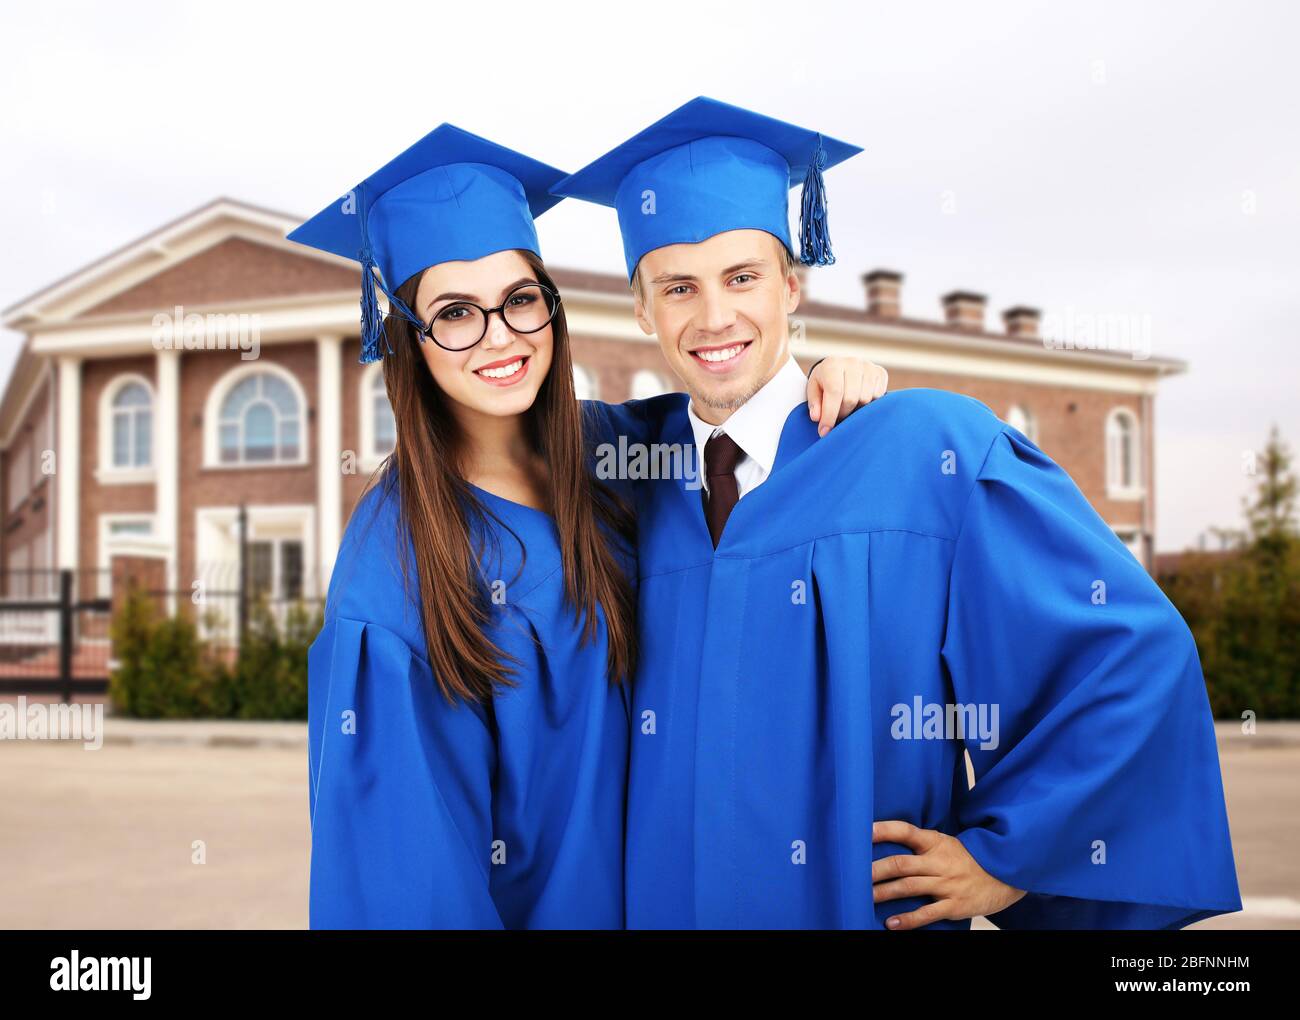 Students in graduation gowns and caps on campus territory Stock Photo